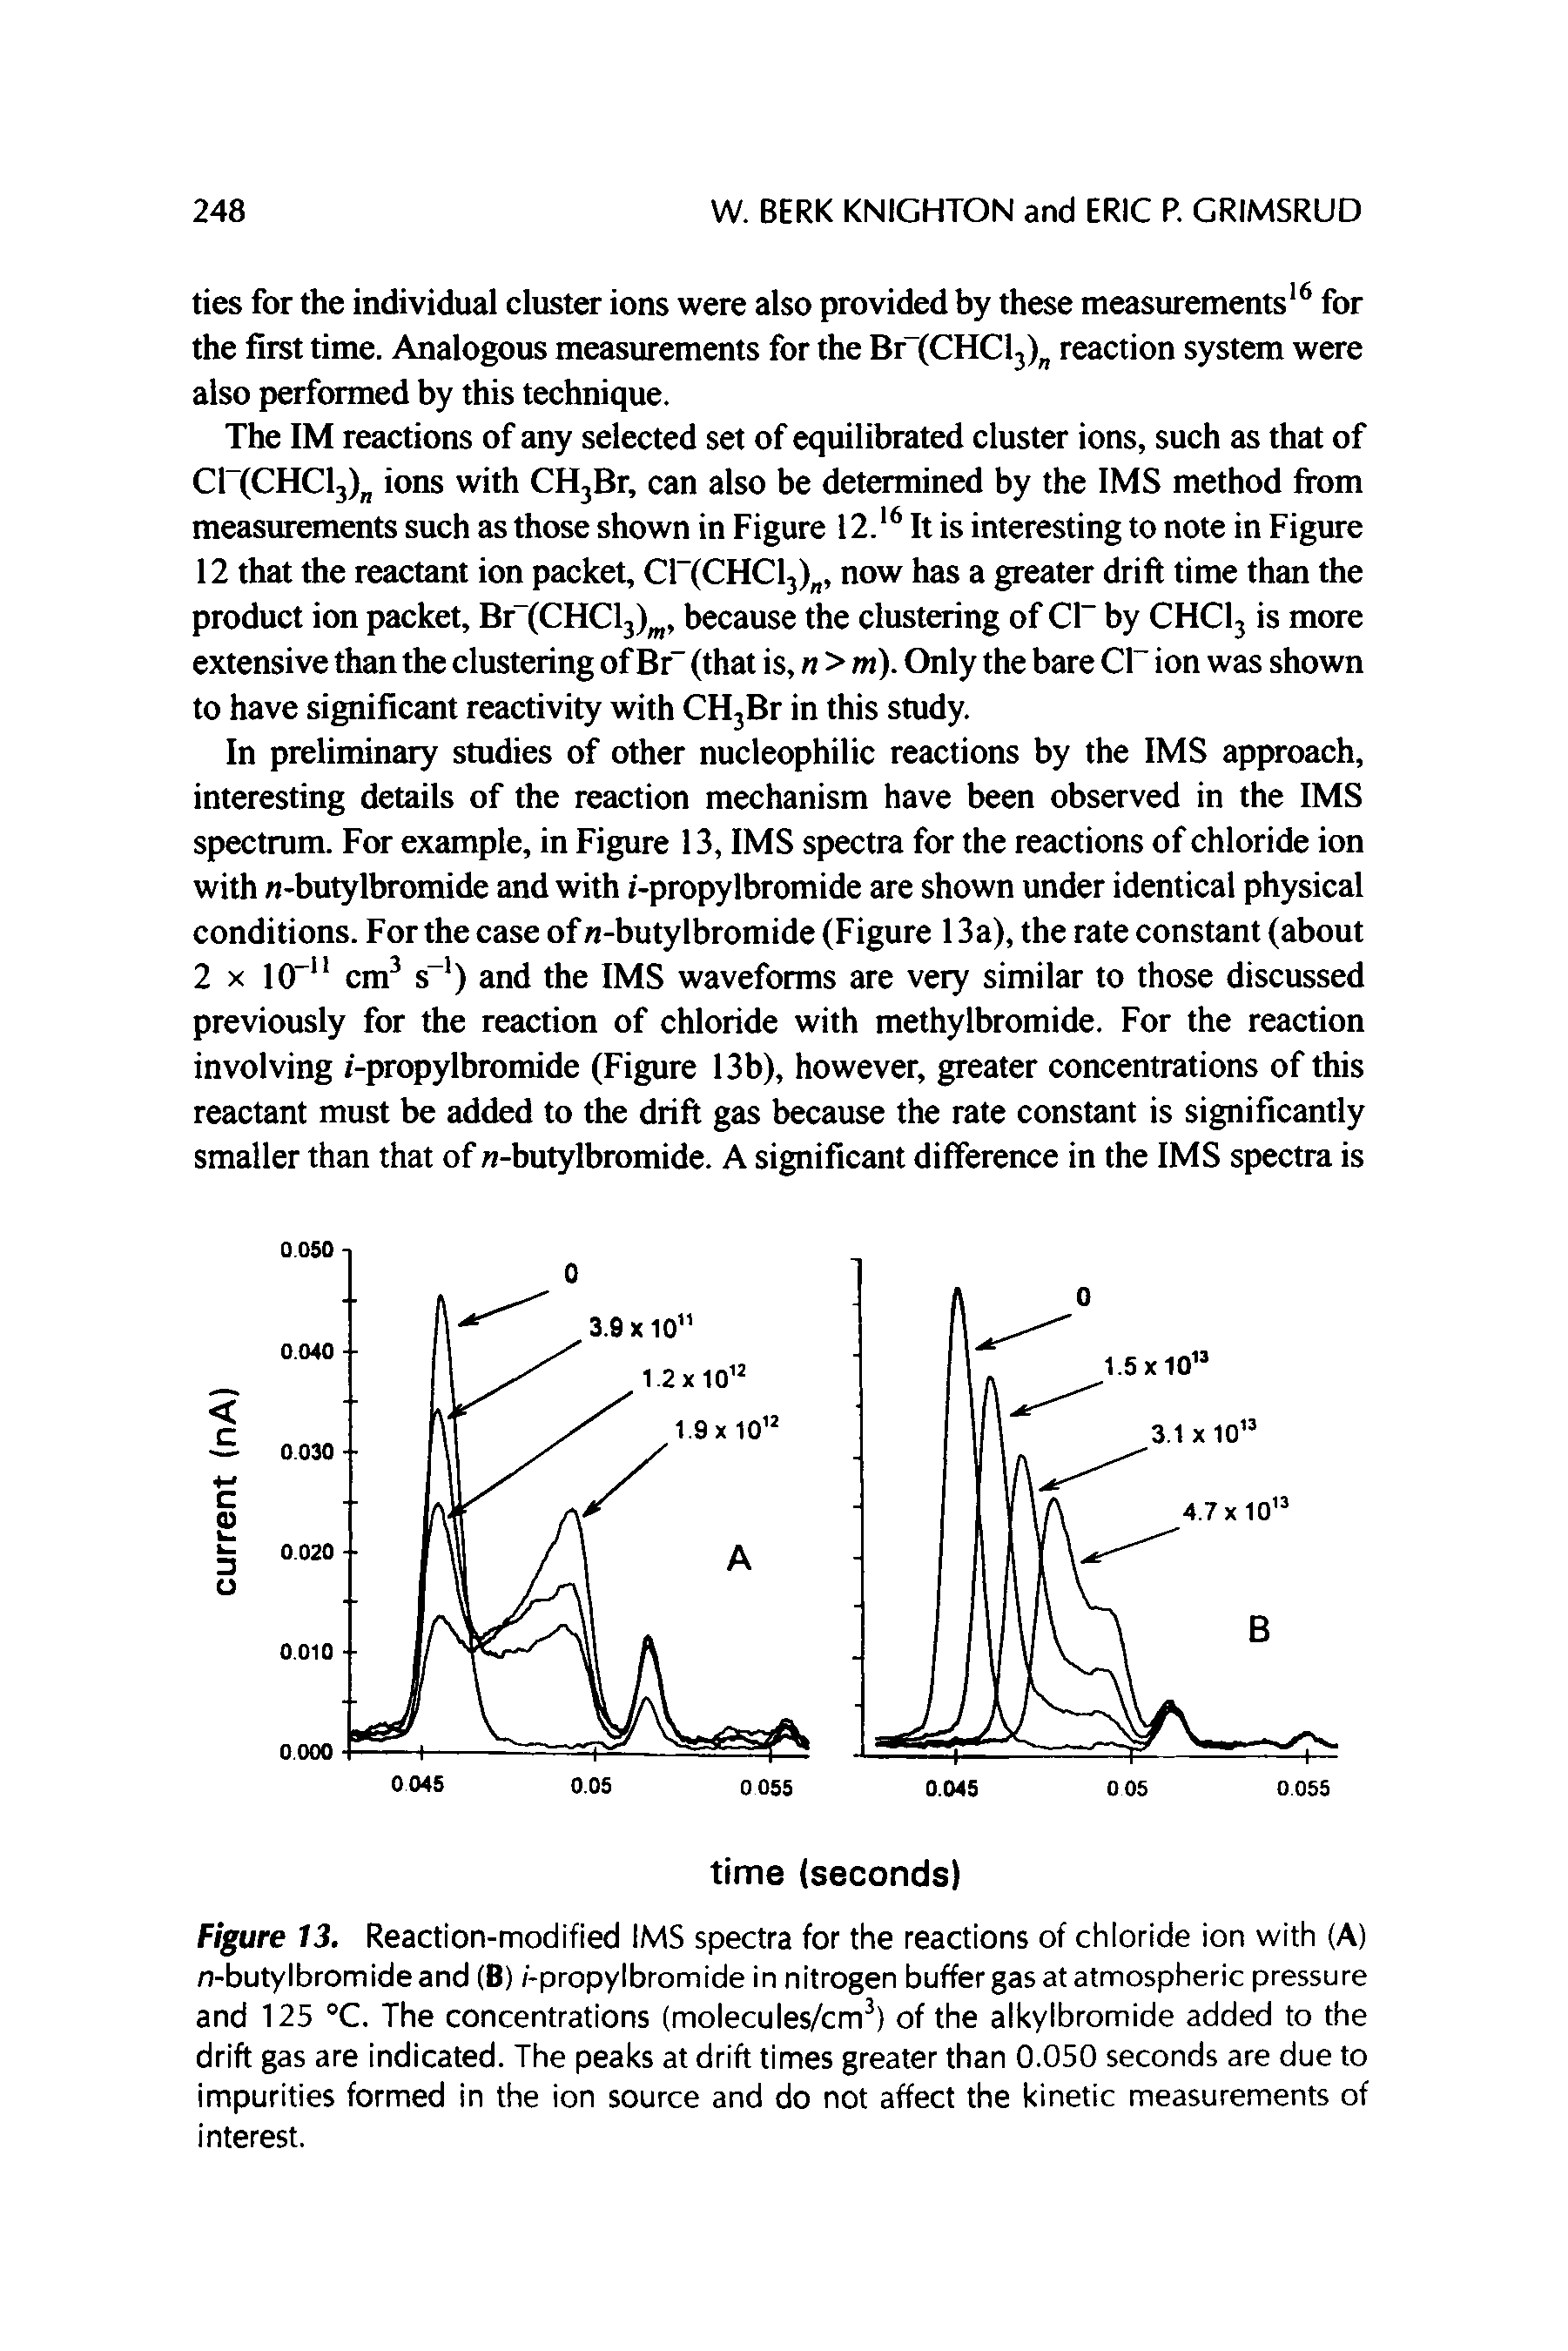 Figure 13. Reaction-modified IMS spectra for the reactions of chioride ion with (A) n-butylbromideand (B) /-propylbromide in nitrogen buffer gas at atmospheric pressure and 125 °C. The concentrations (molecules/cm ) of the alkylbromide added to the drift gas are indicated. The peaks at drift times greater than 0.050 seconds are due to impurities formed in the ion source and do not affect the kinetic measurements of interest.